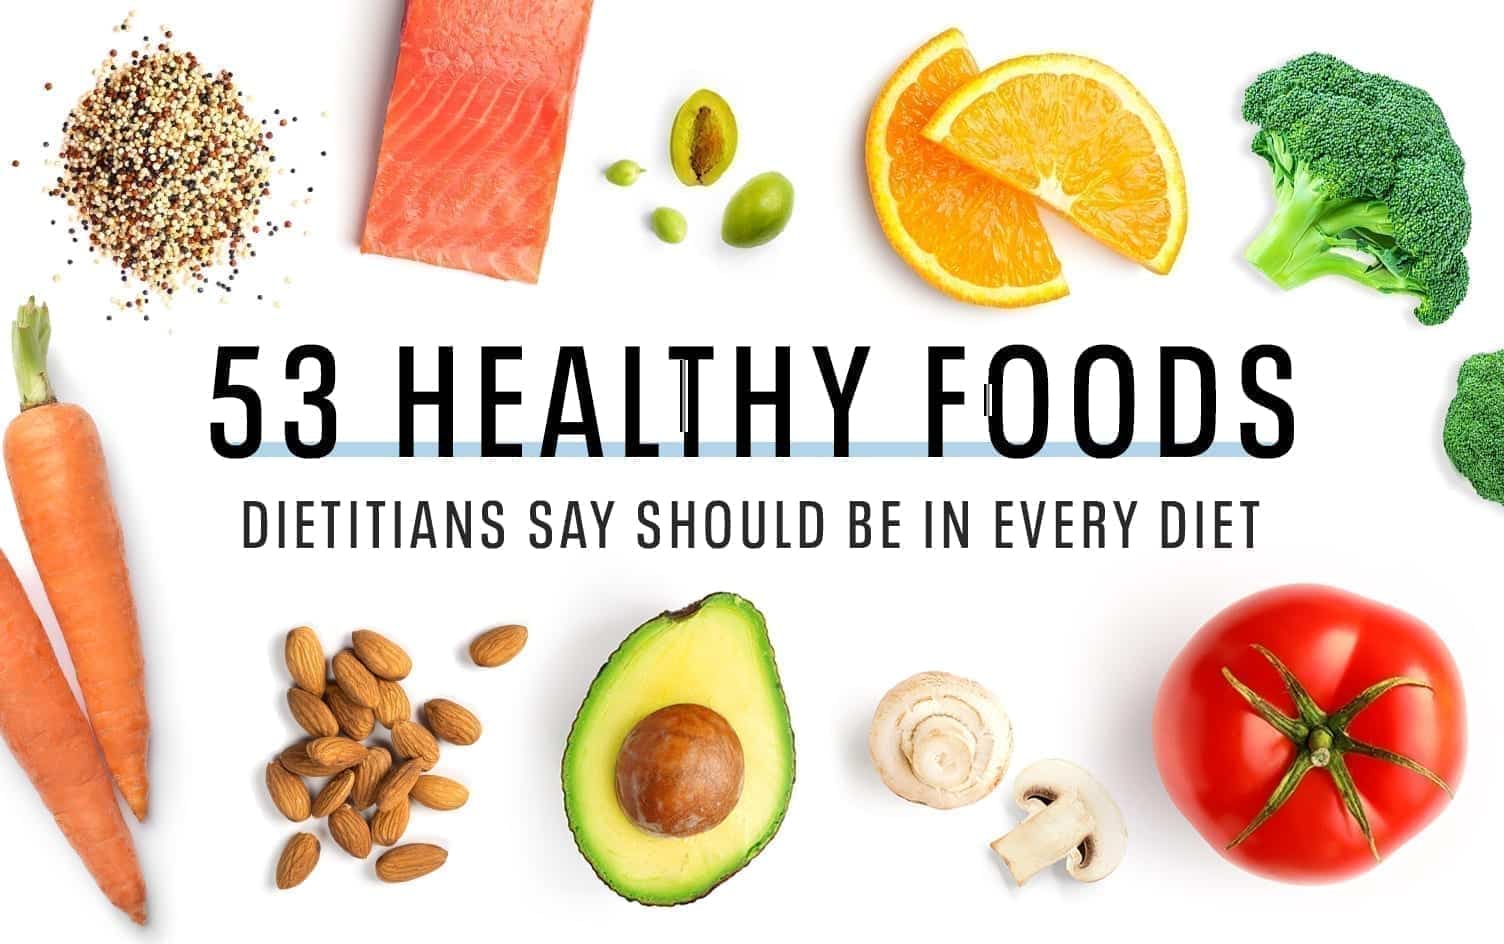 53 Healthy Foods Dietitians Say Should Be in Every Diet Nutrition | MyFitnessPal